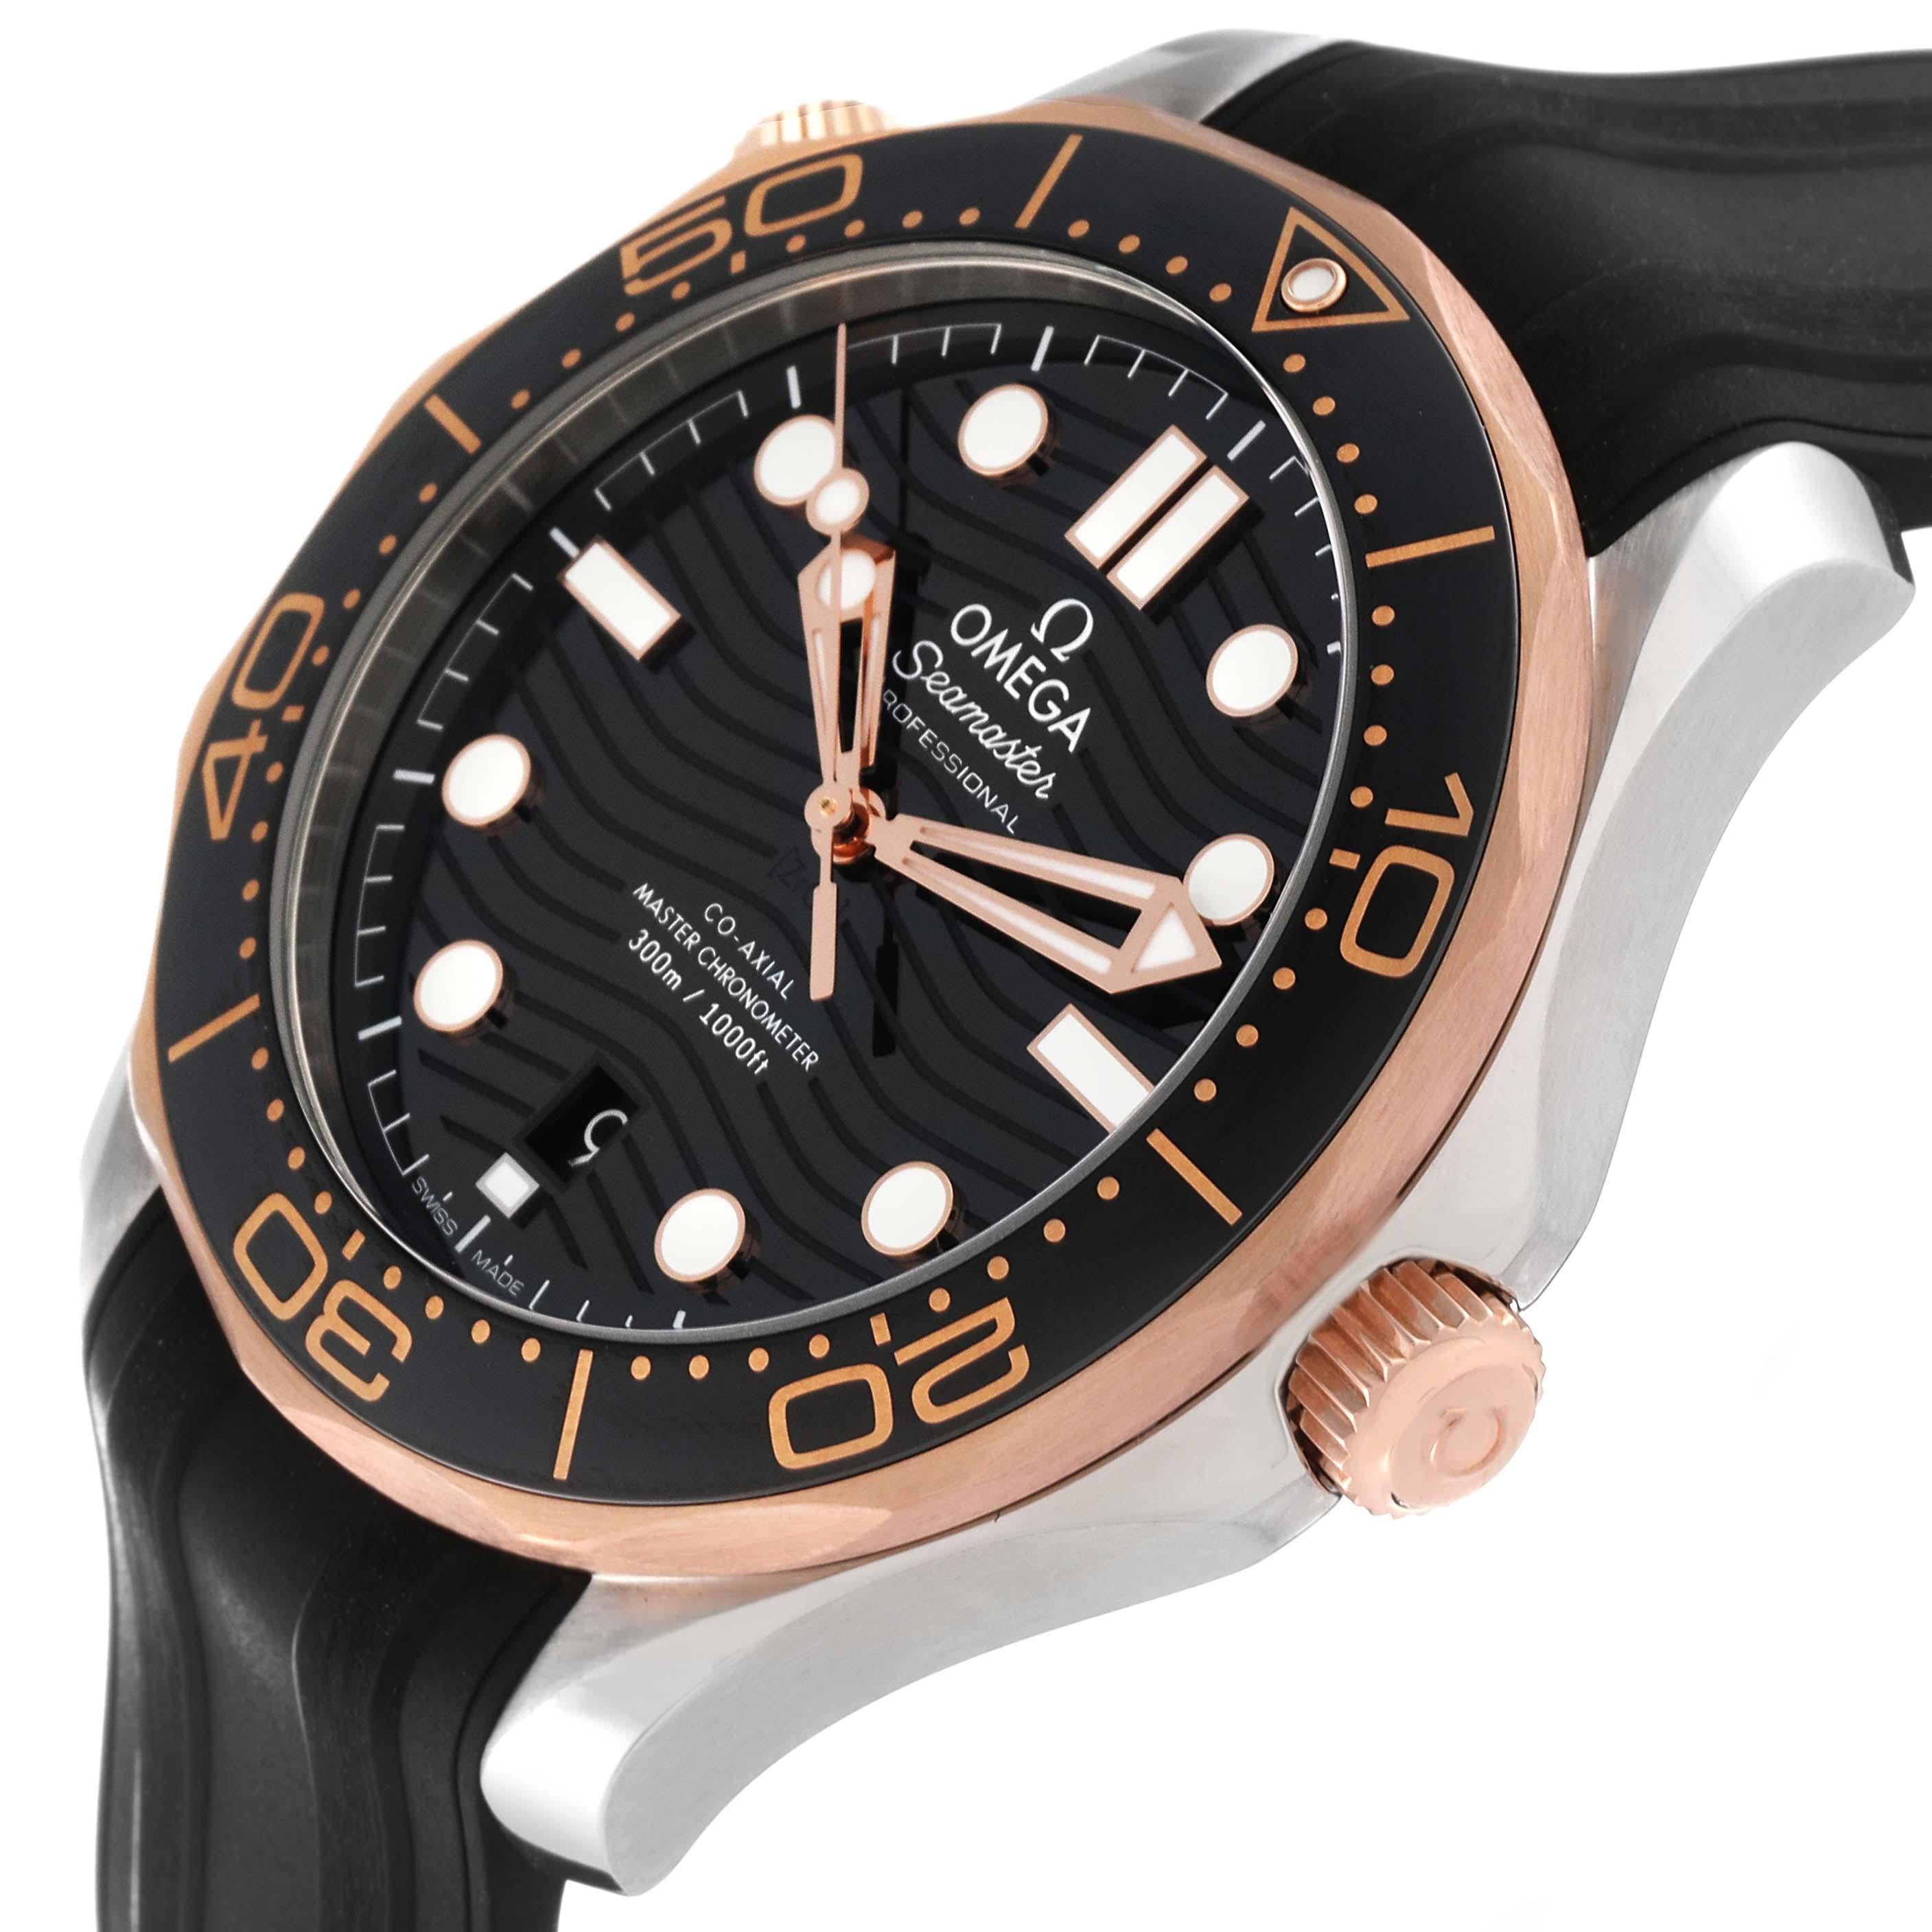 Omega Seamaster Diver Steel Rose Gold Mens Watch 210.22.42.20.01.002 Box Card For Sale 5